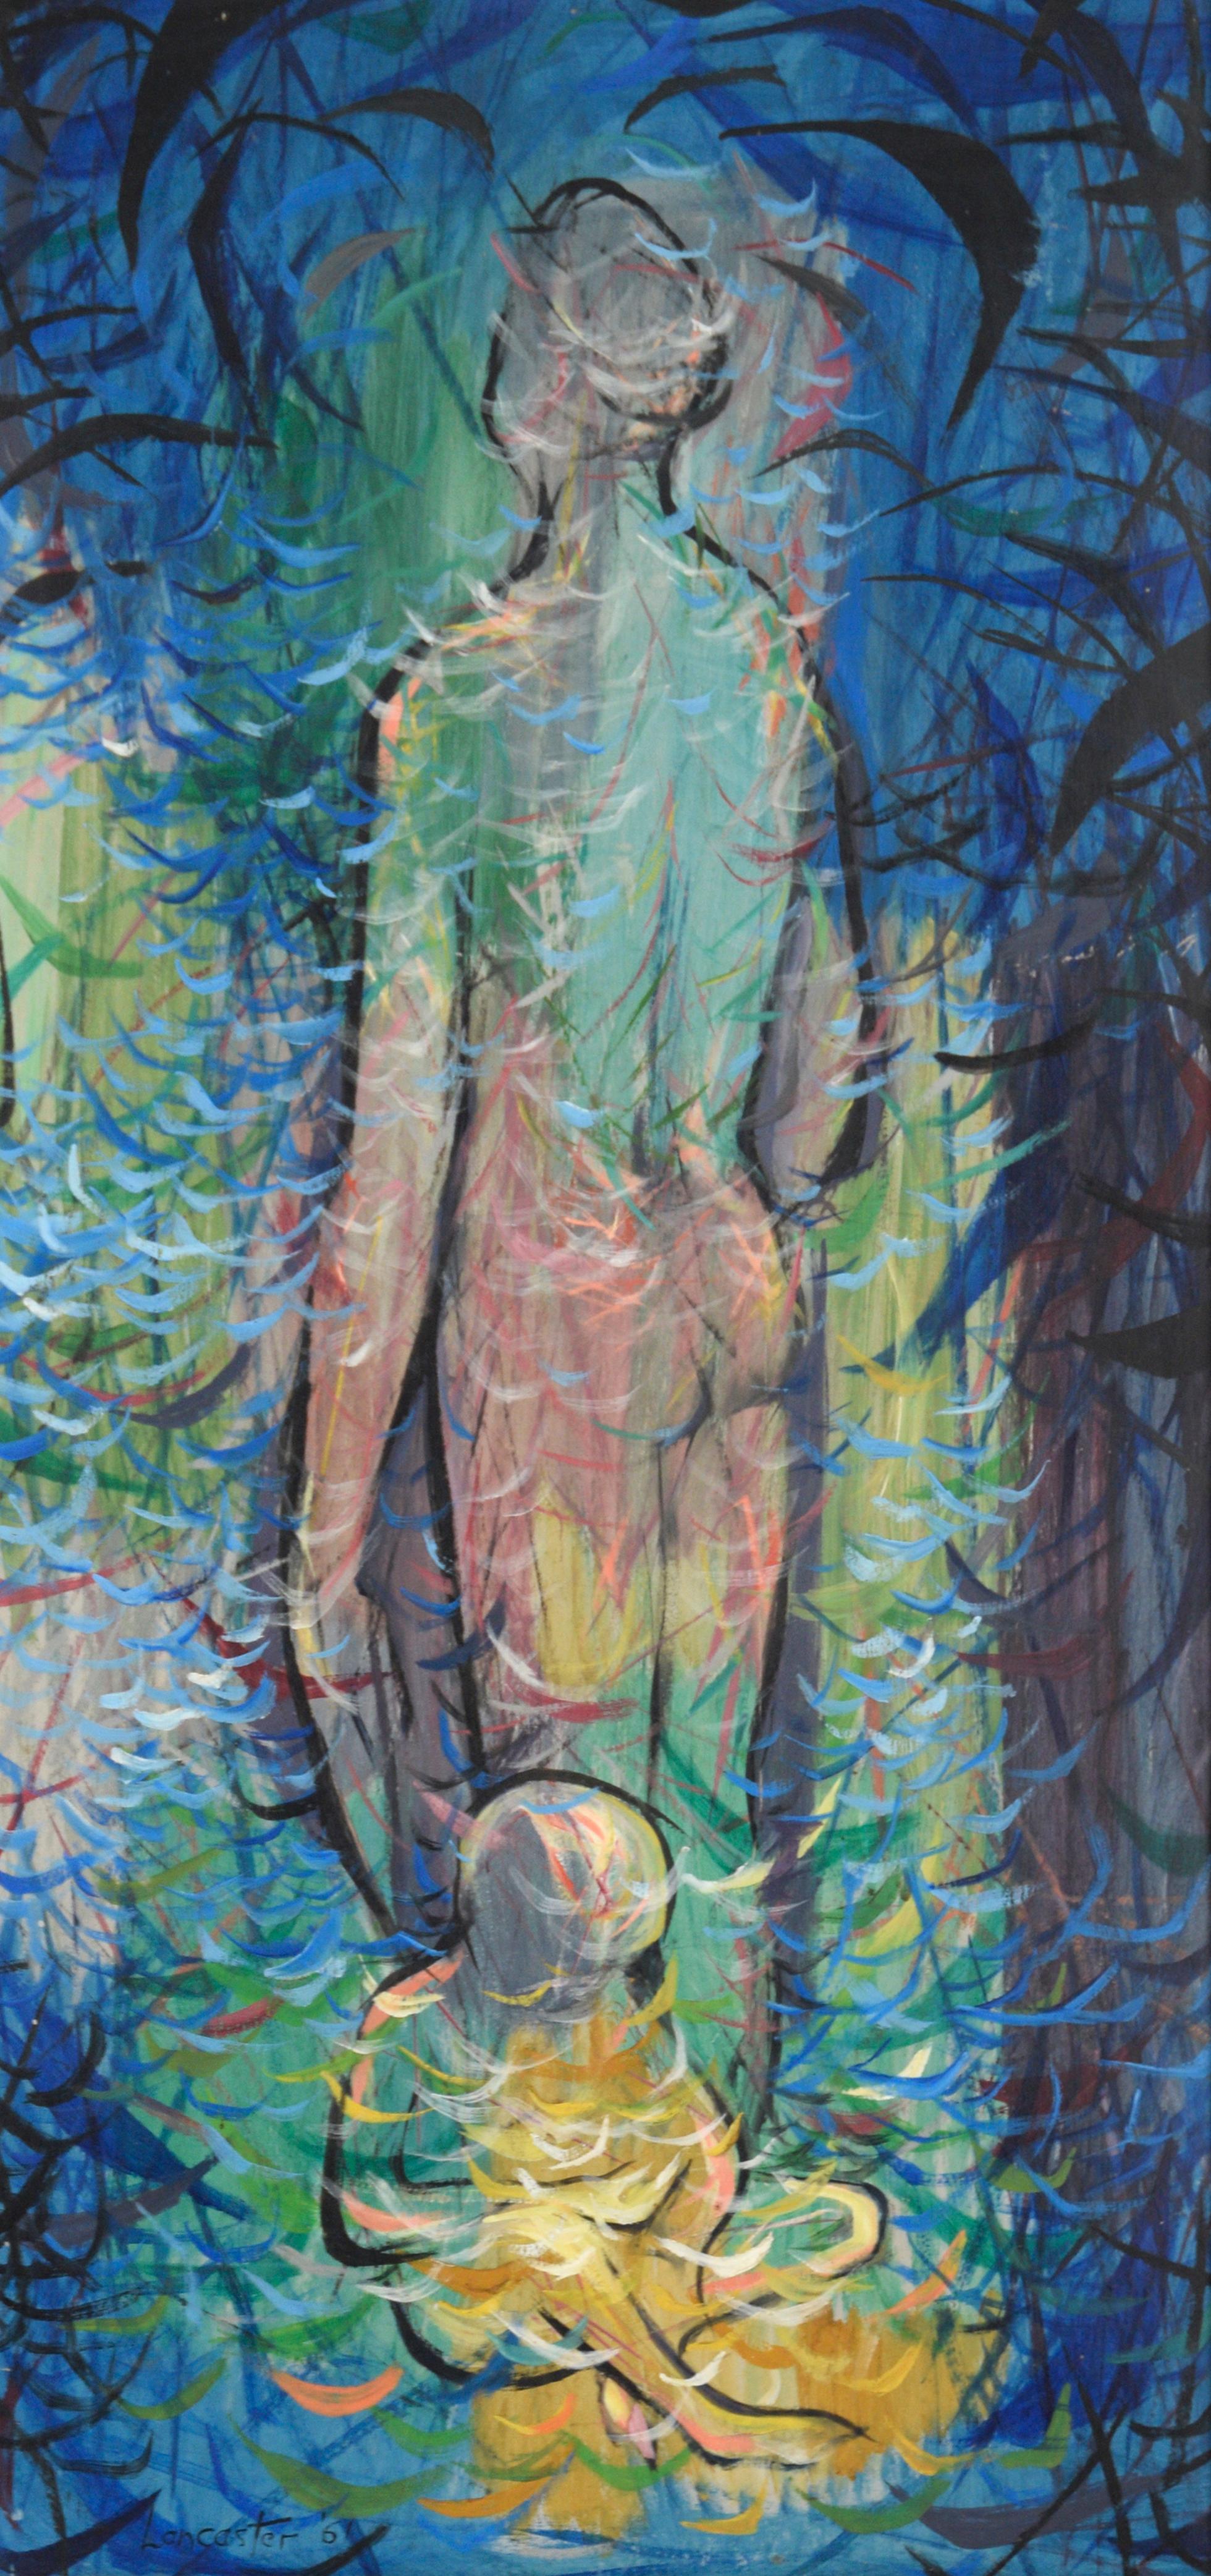 Looking into the Sacred Forest - Mystical Figurative - Painting by John Lancaster